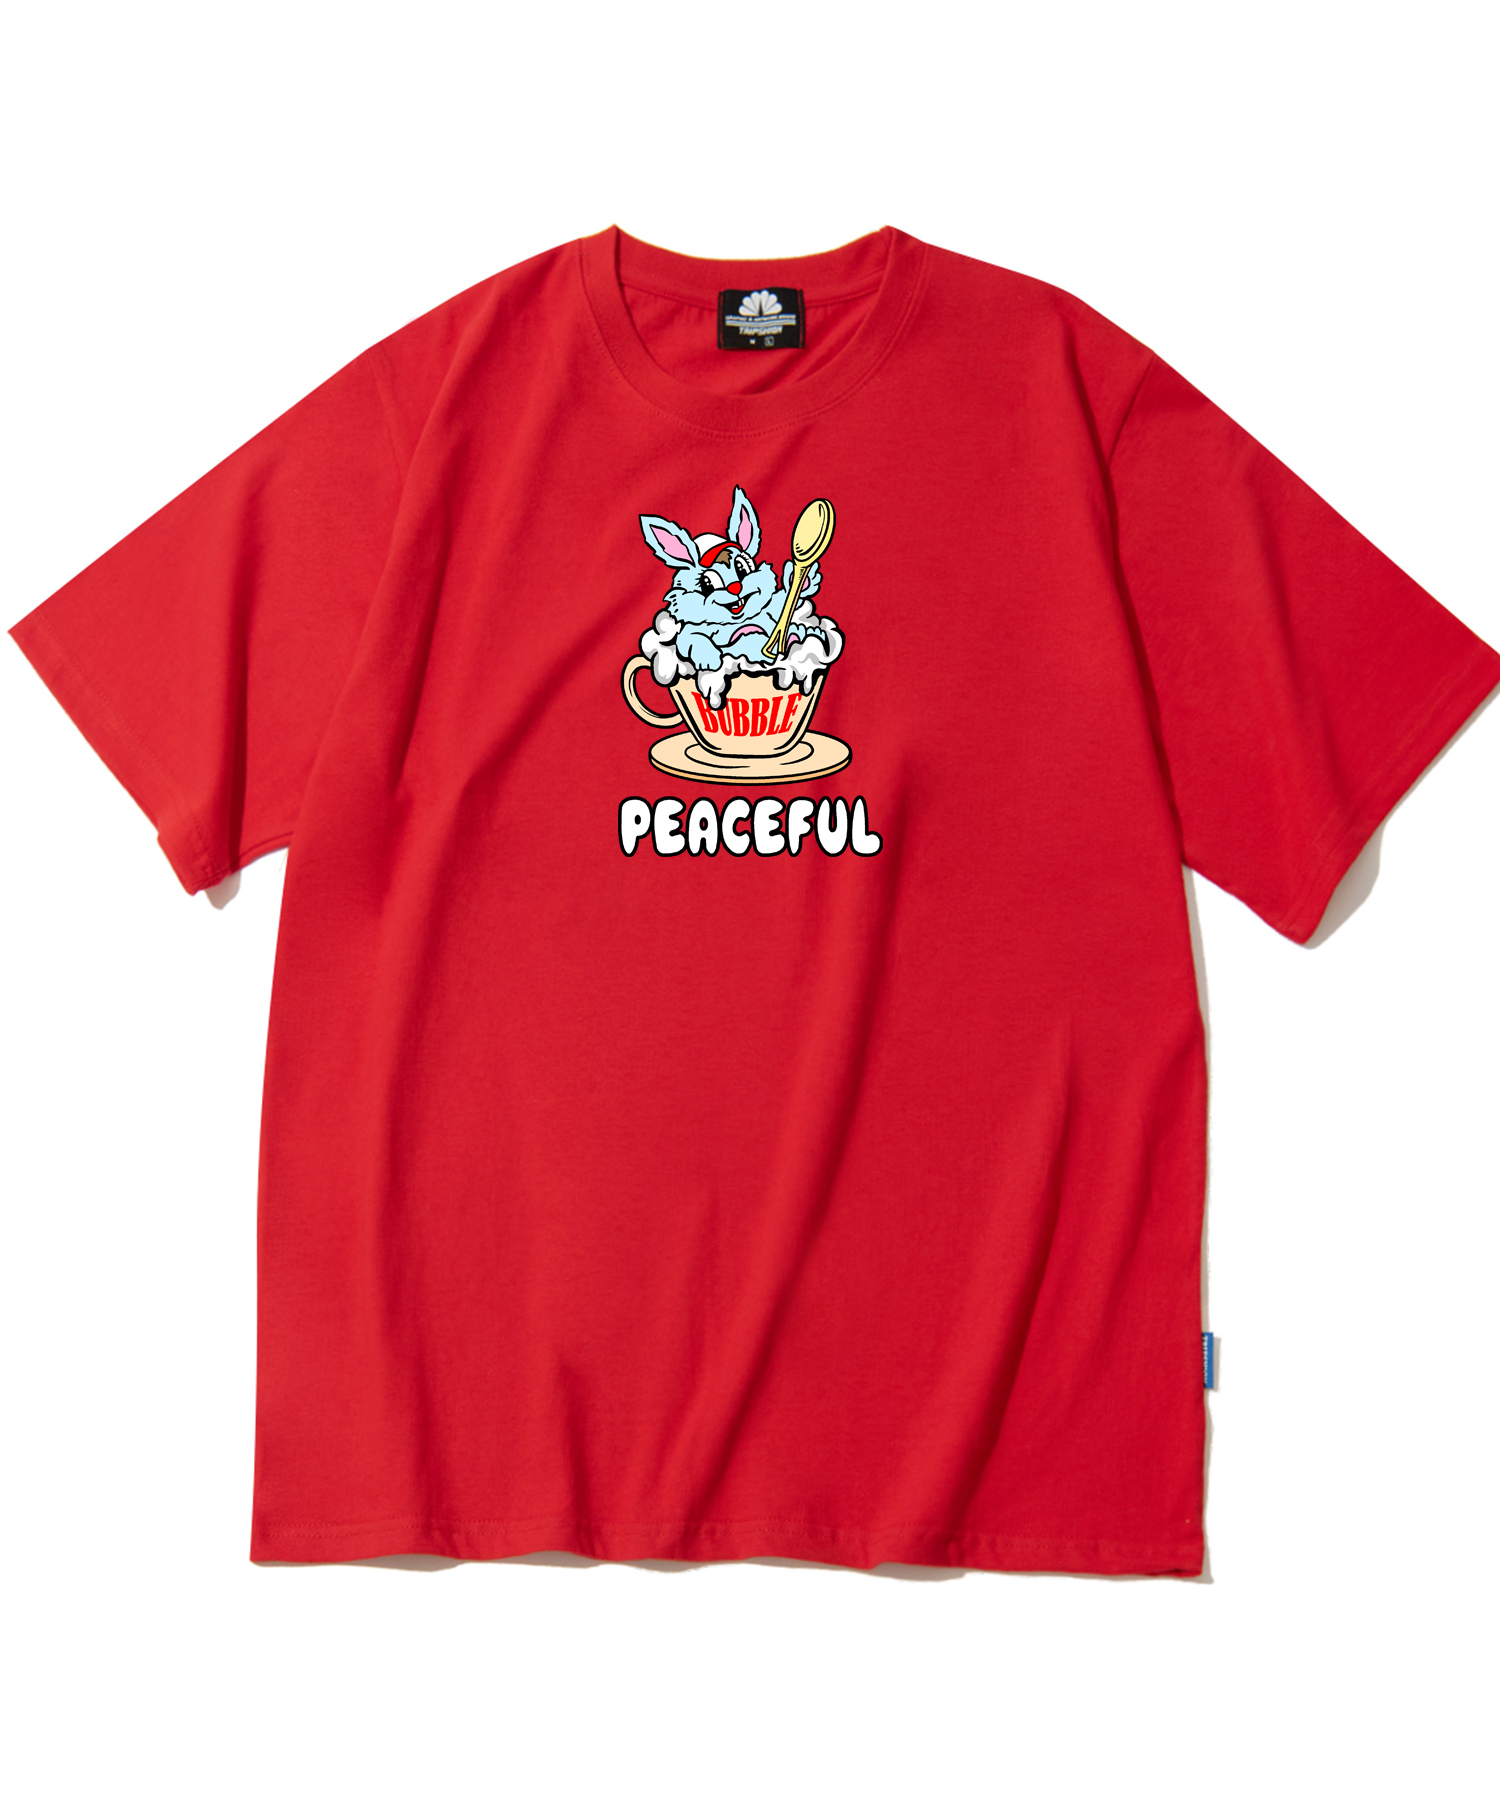 PEACEFUL RABBIT GRAPHIC T-SHIRTS - RED